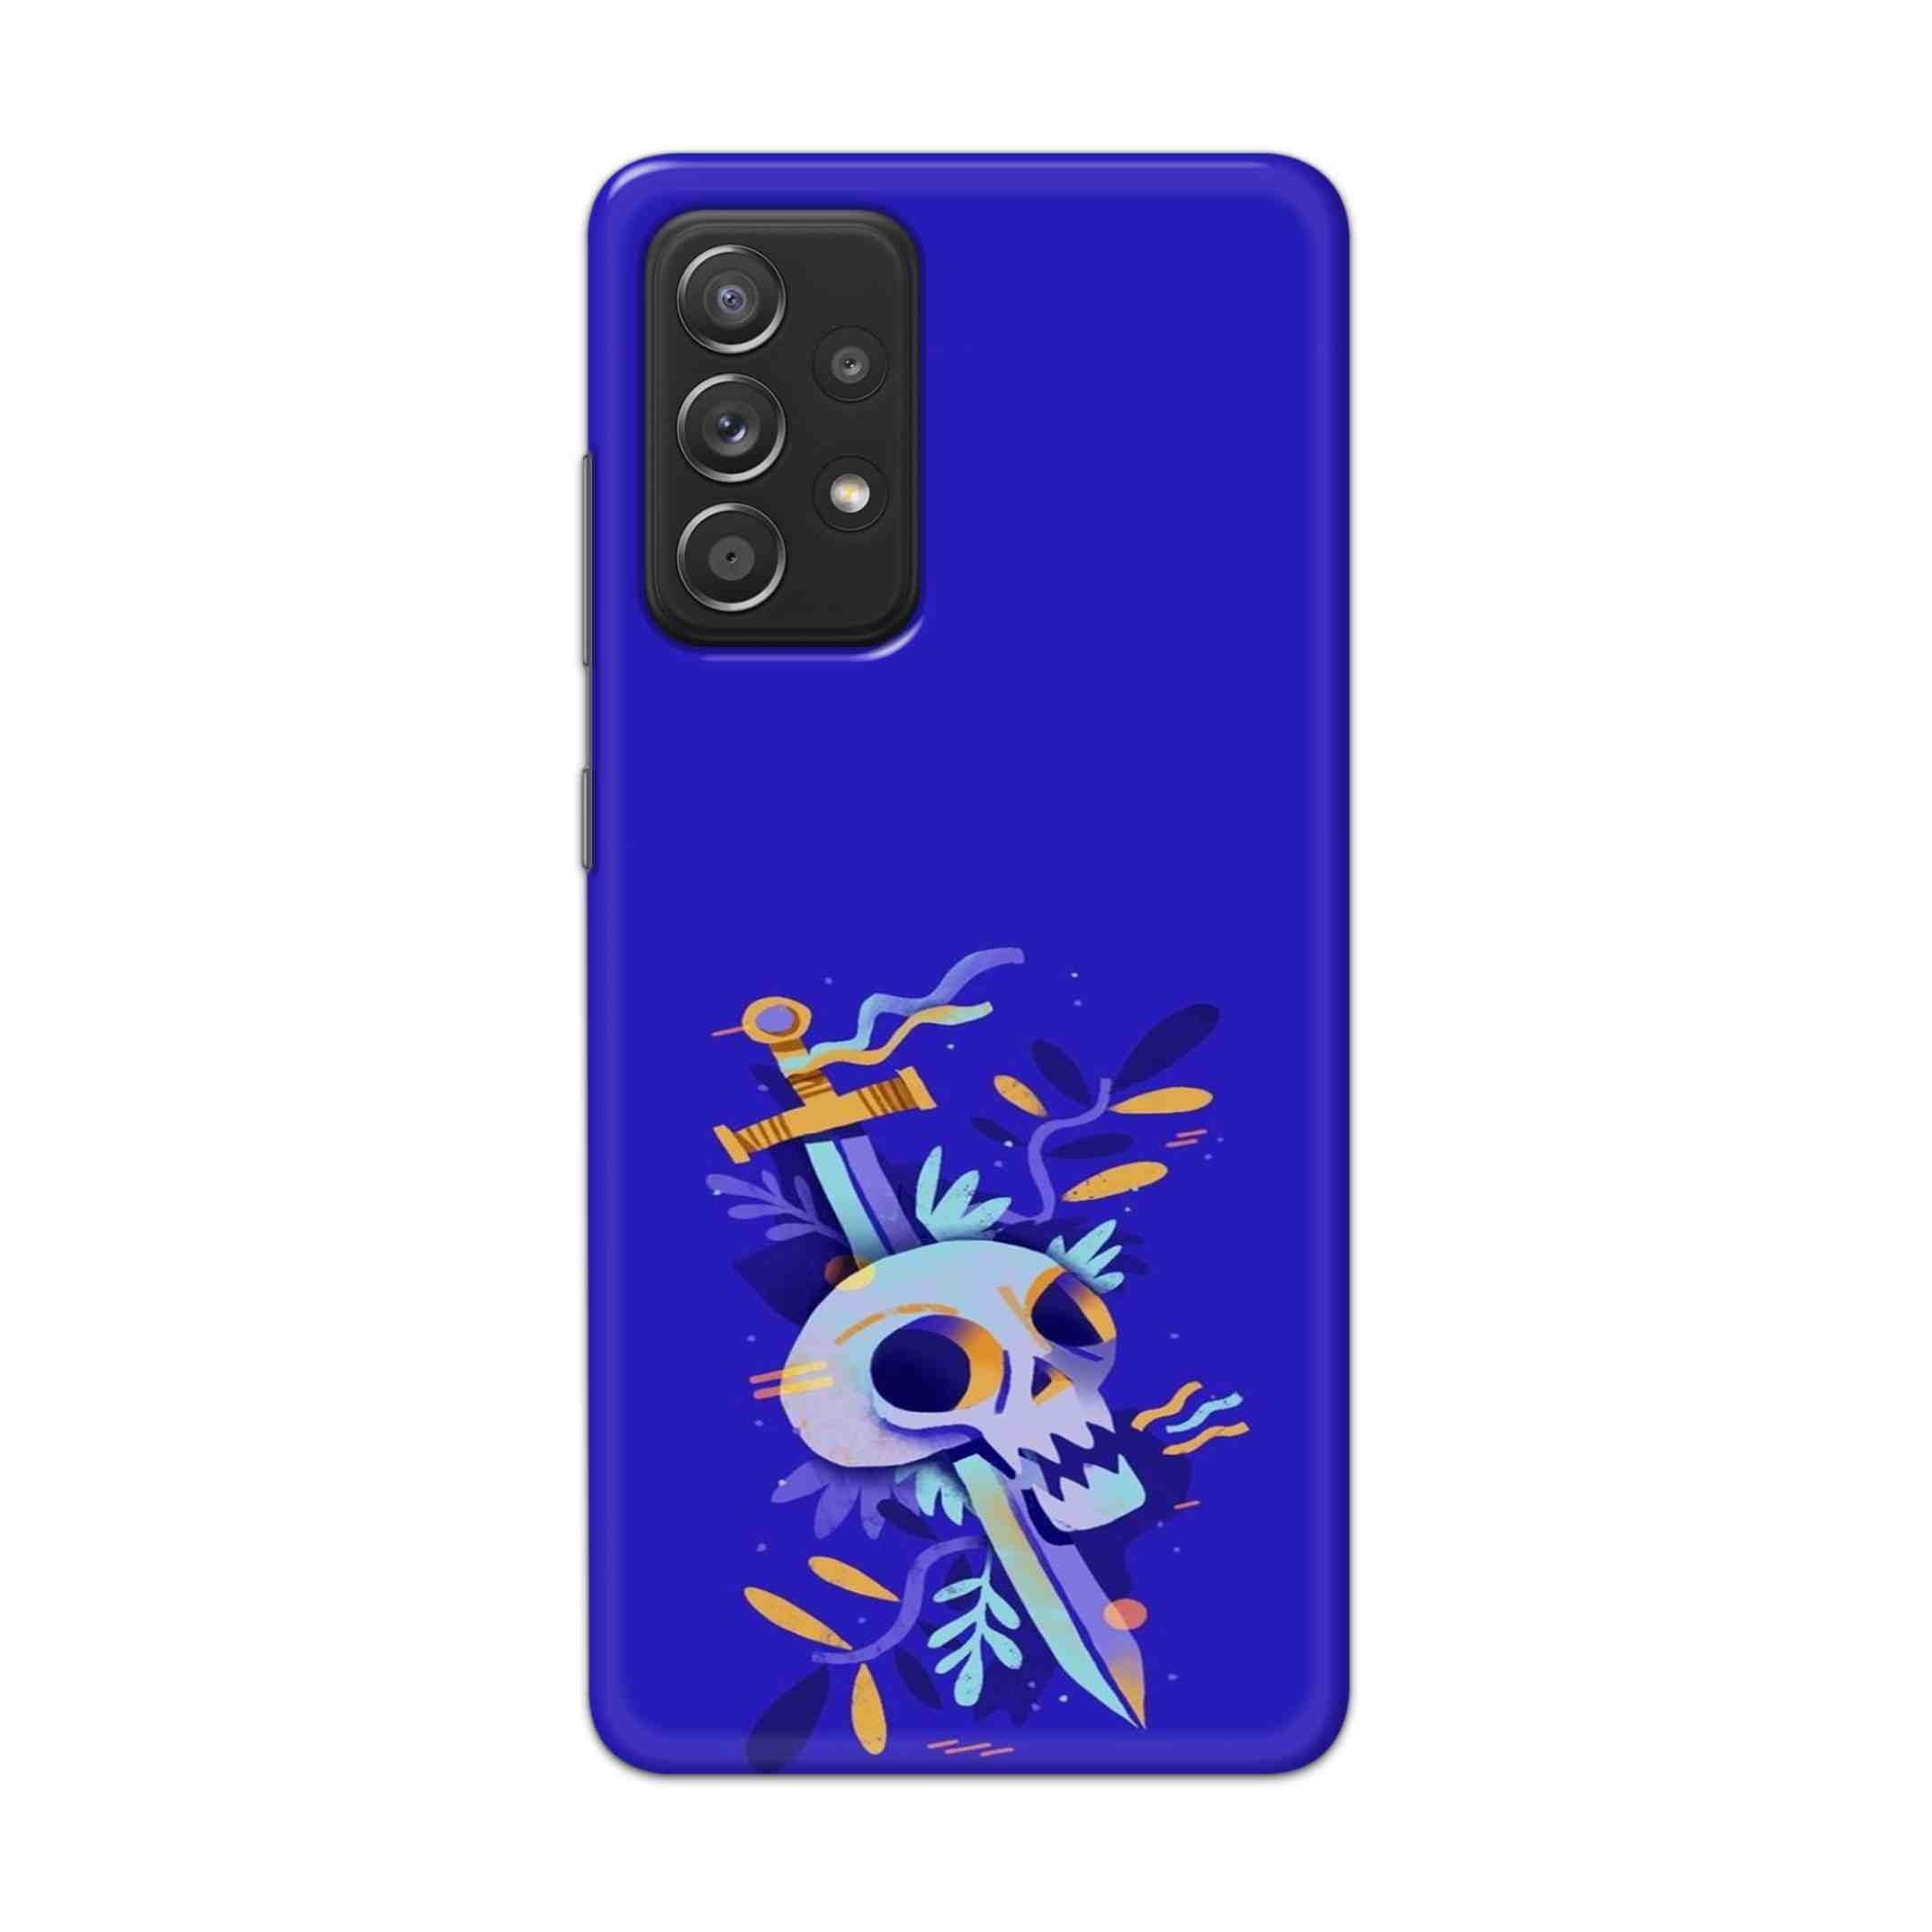 Buy Blue Skull Hard Back Mobile Phone Case Cover For Samsung Galaxy A52 Online